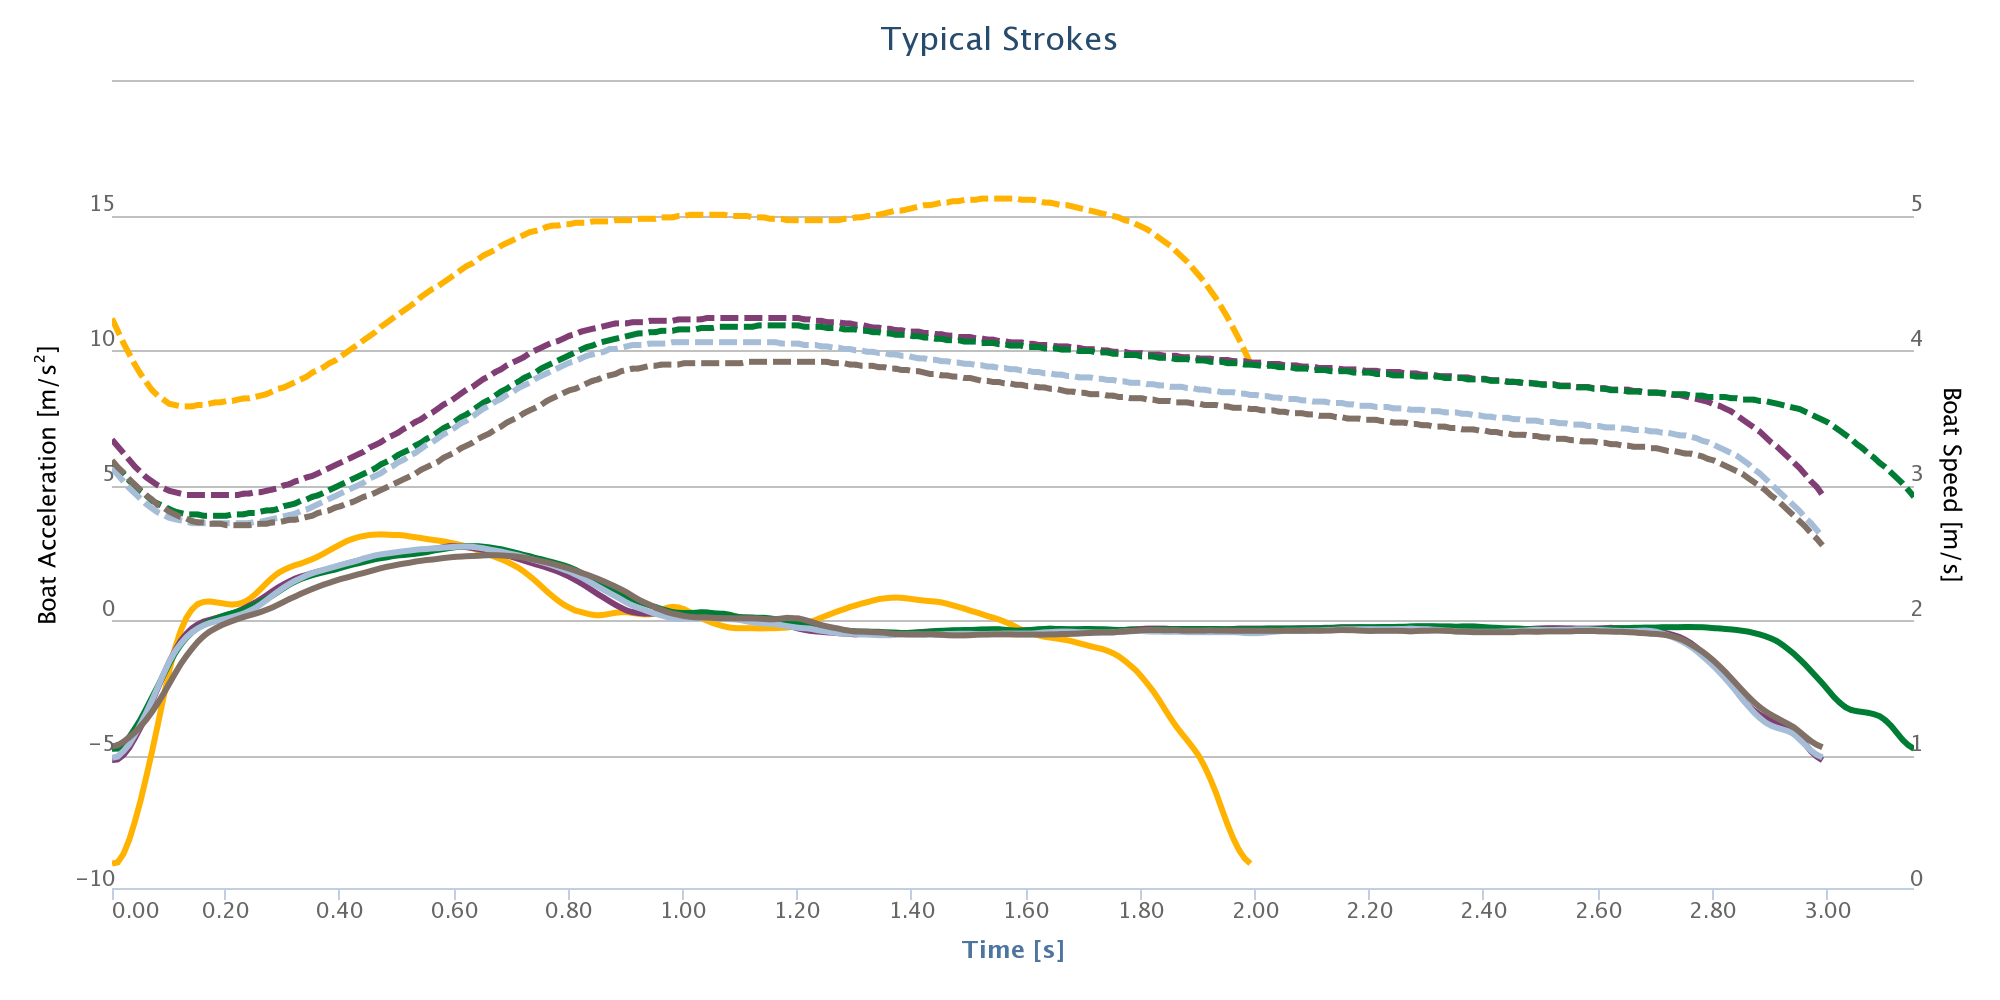 RIM analysis of today's typical strokes